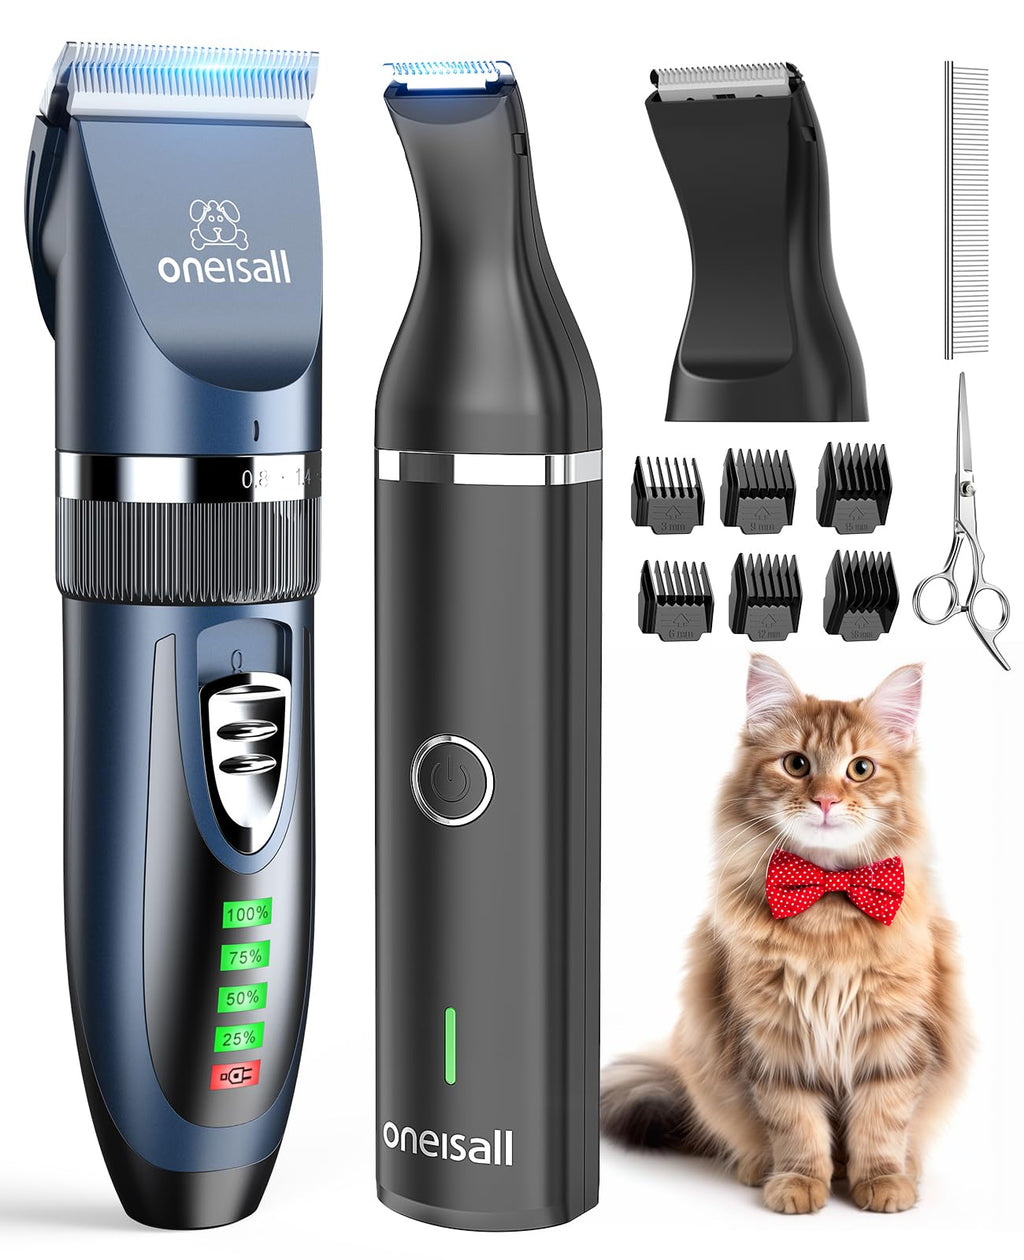 oneisall Cat Clippers for Matted Hair,2 in 1 Cat Grooming Kit,Quiet Cordless Cat Shaver and Paw Trimmer for Long Hair,Cat Hair Trimmer for Grooming, Pet Clippers for Cats